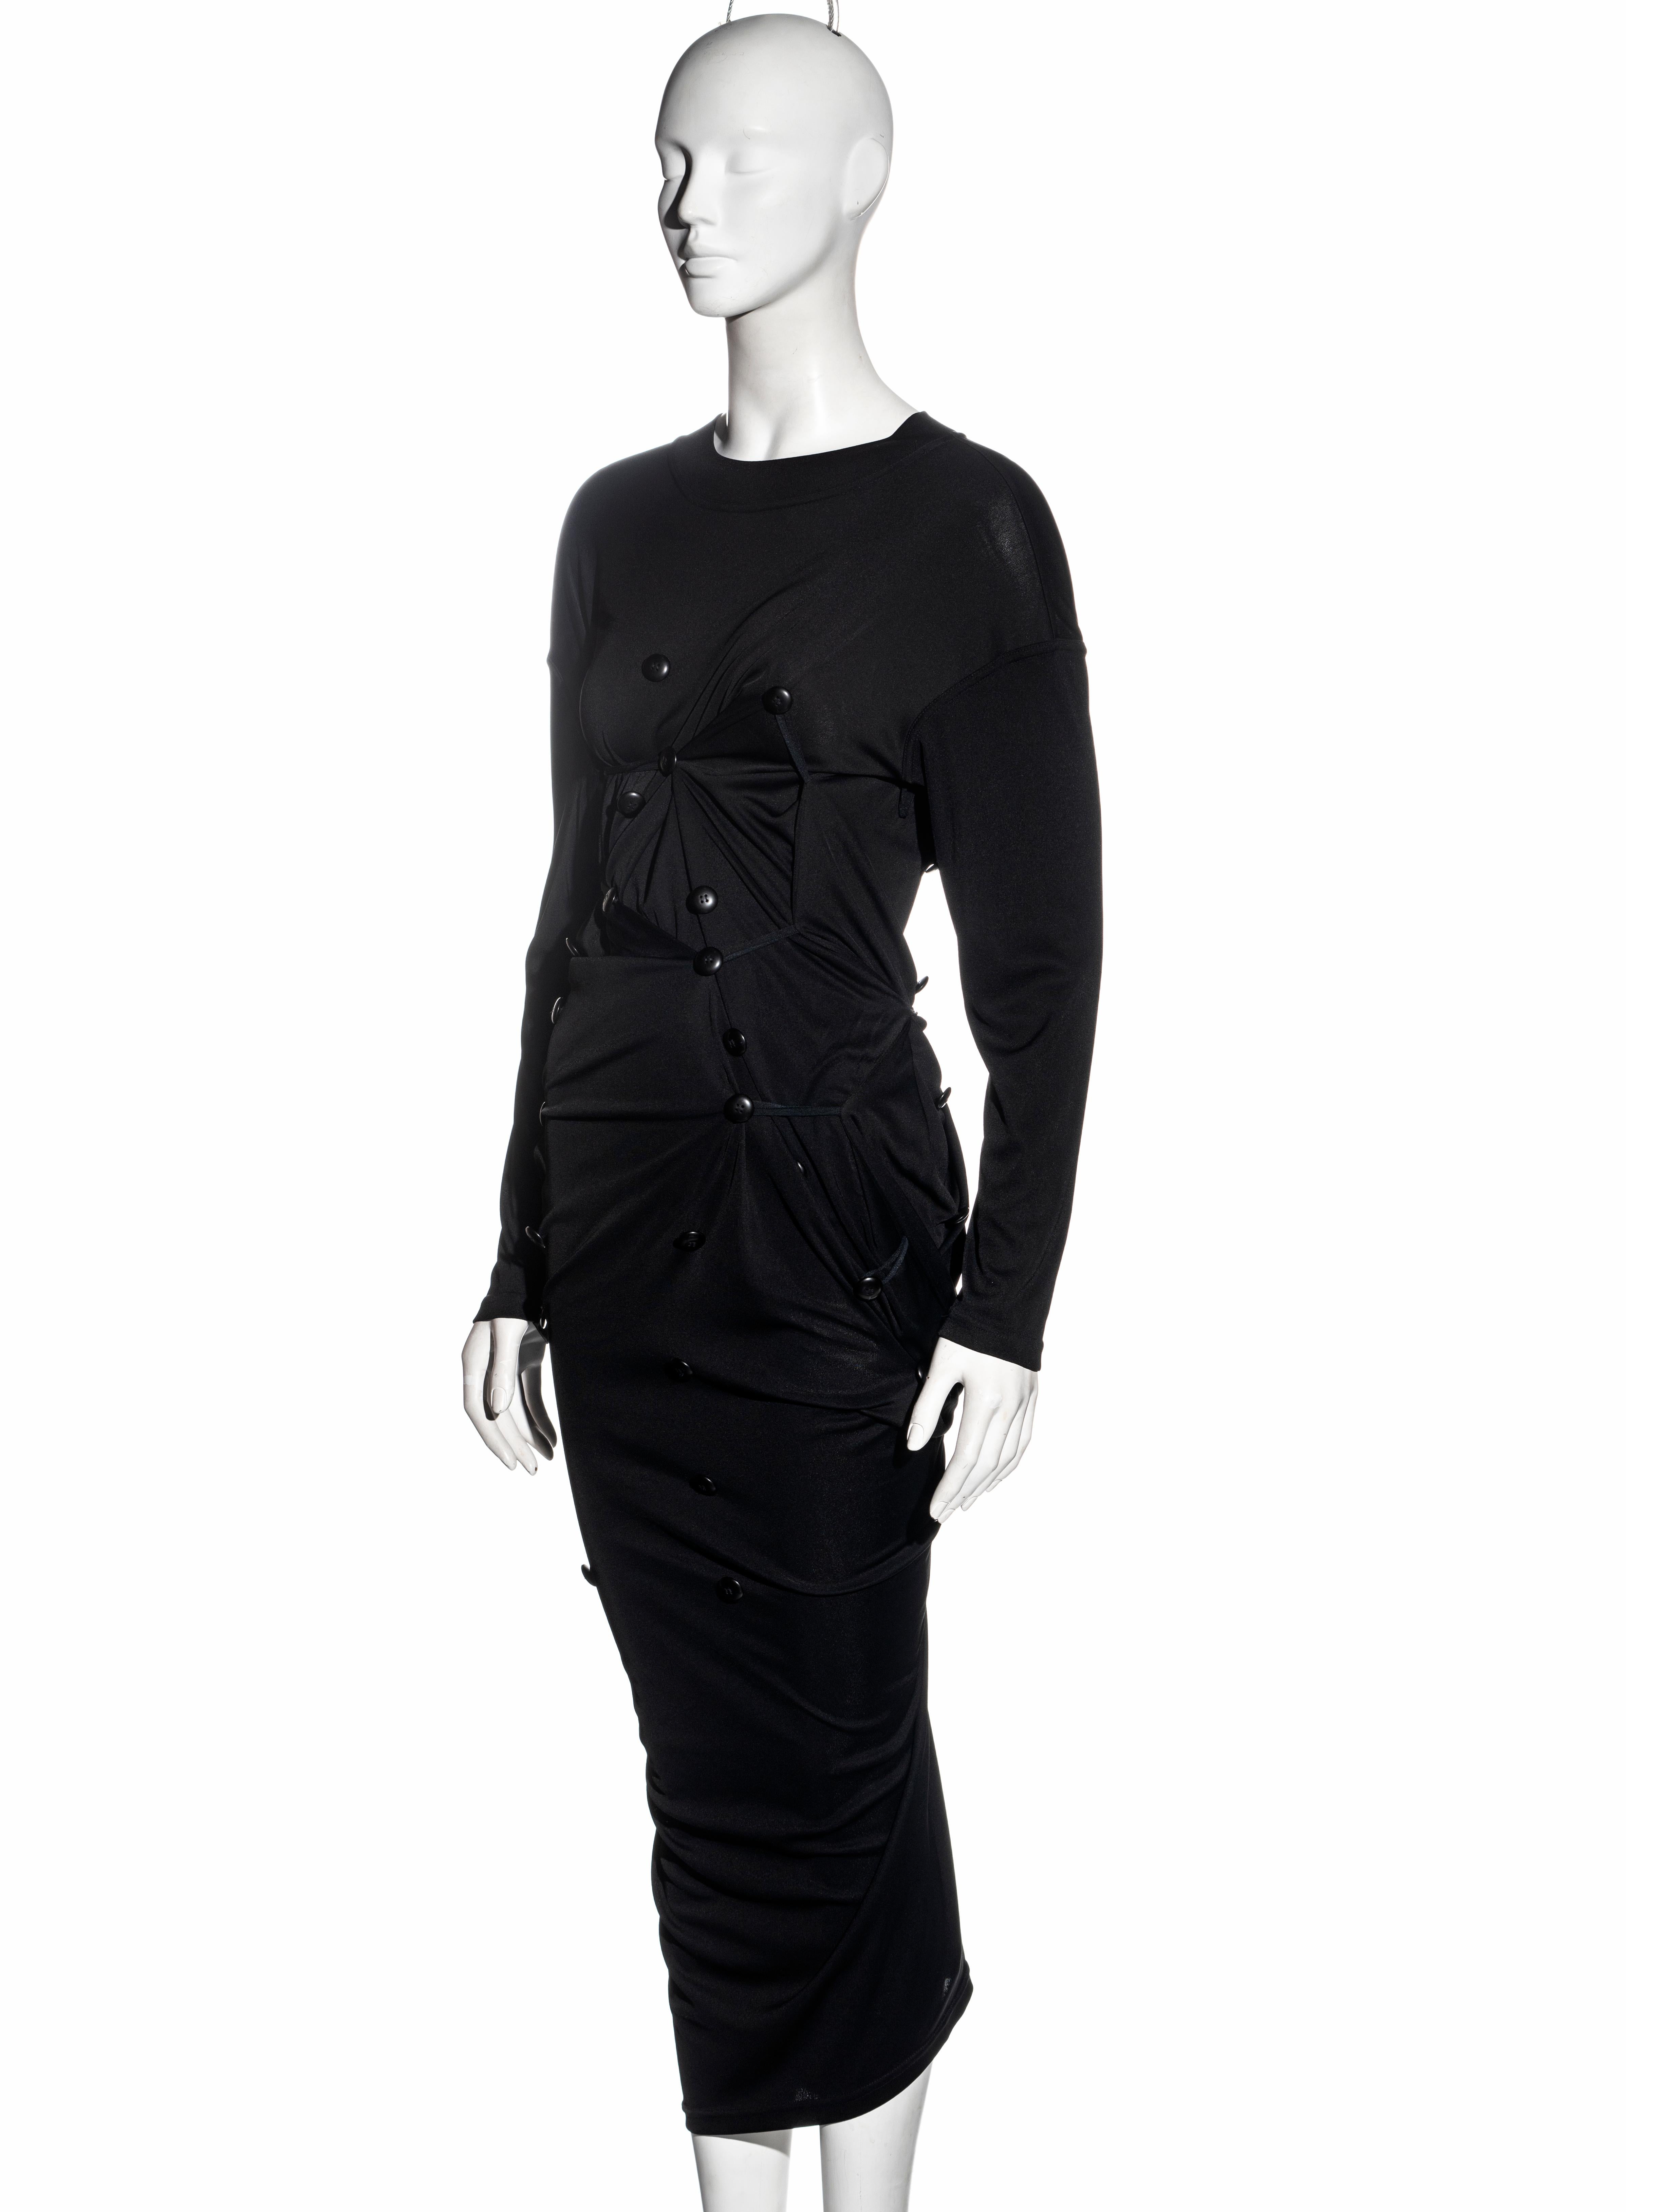 Dolce & Gabbana black jersey maxi dress with adjustable button closures, fw 1987 For Sale 1